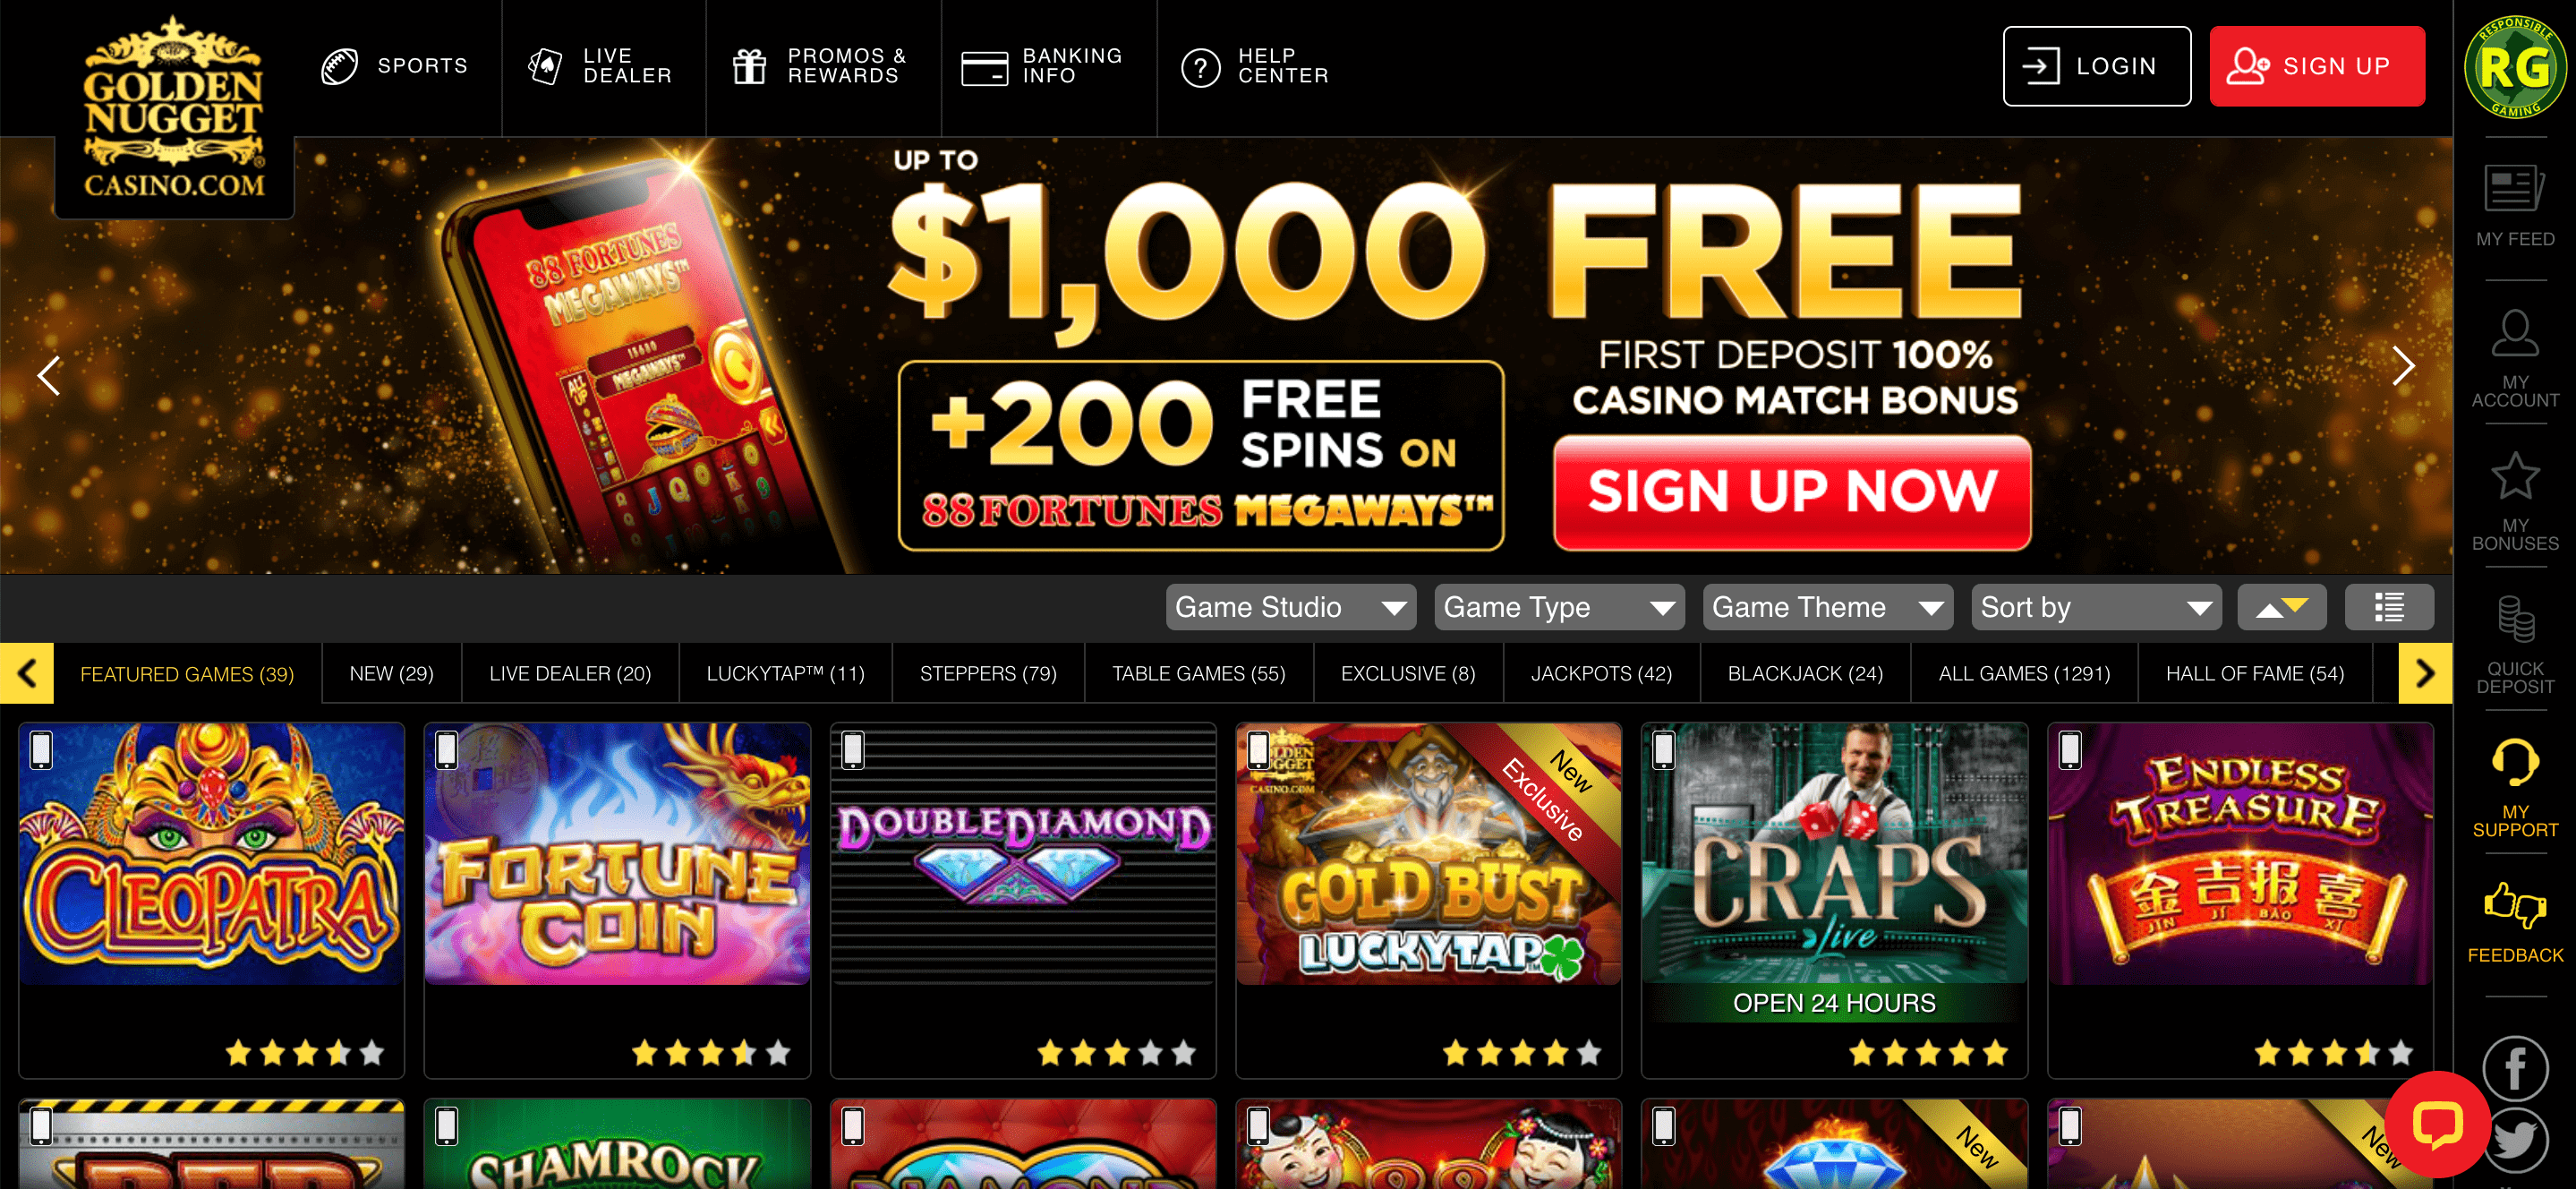 Golden Nugget Casino NJ Home Page